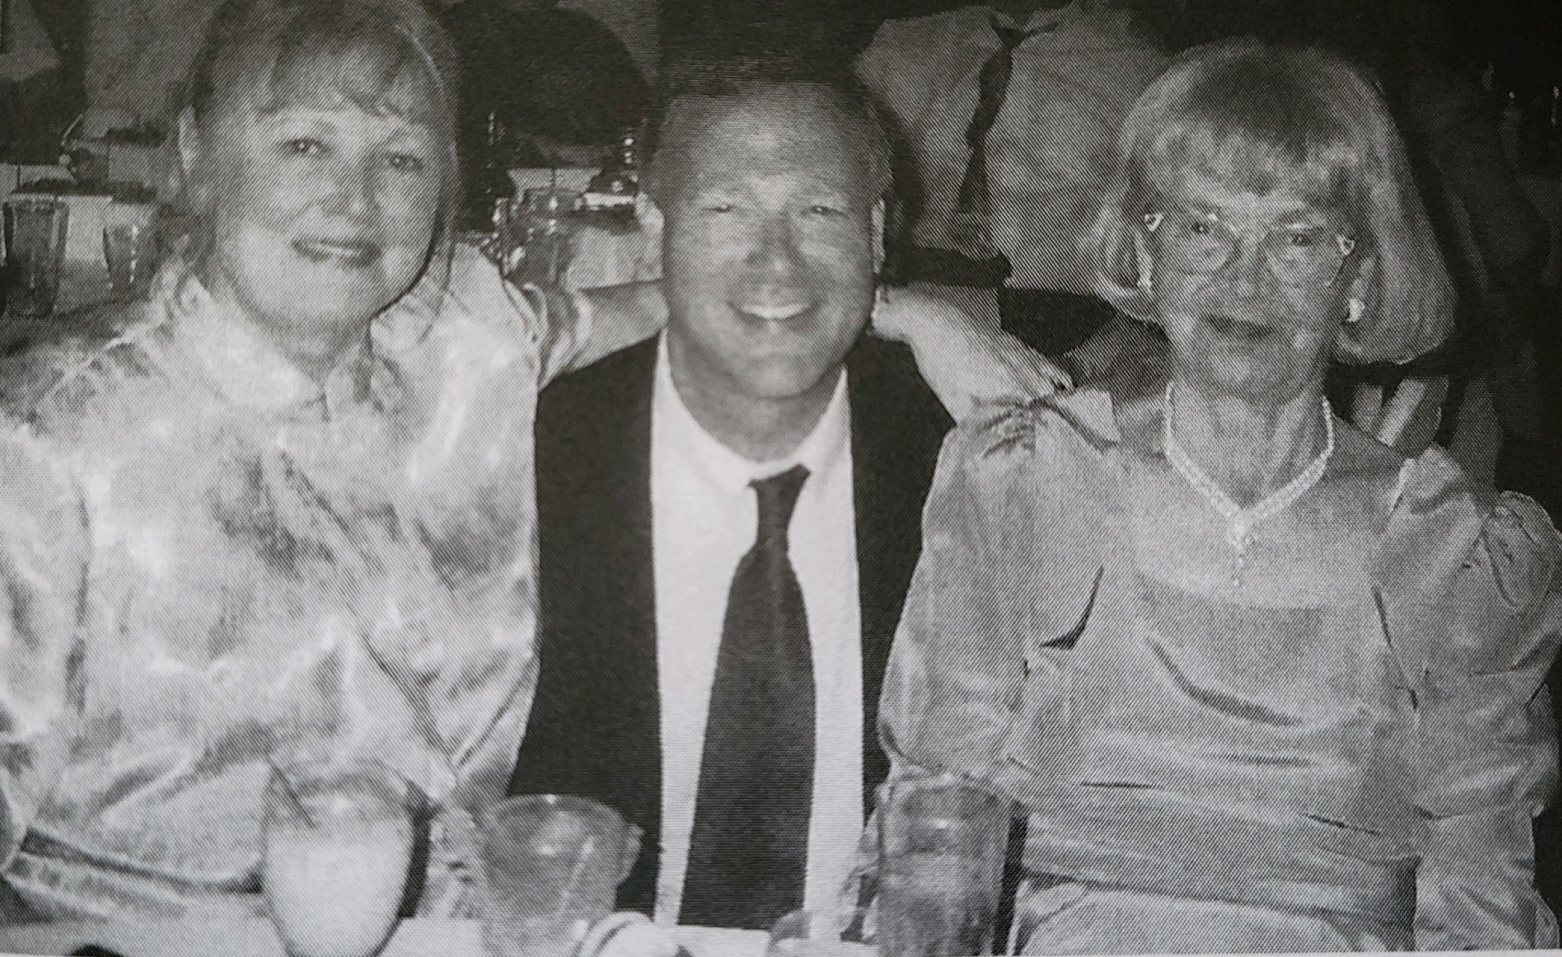 O'Connor (center) is pictured with his sister Gail (left) and mother (right). He named a scholarship endowment at OCC in his mother's memory.